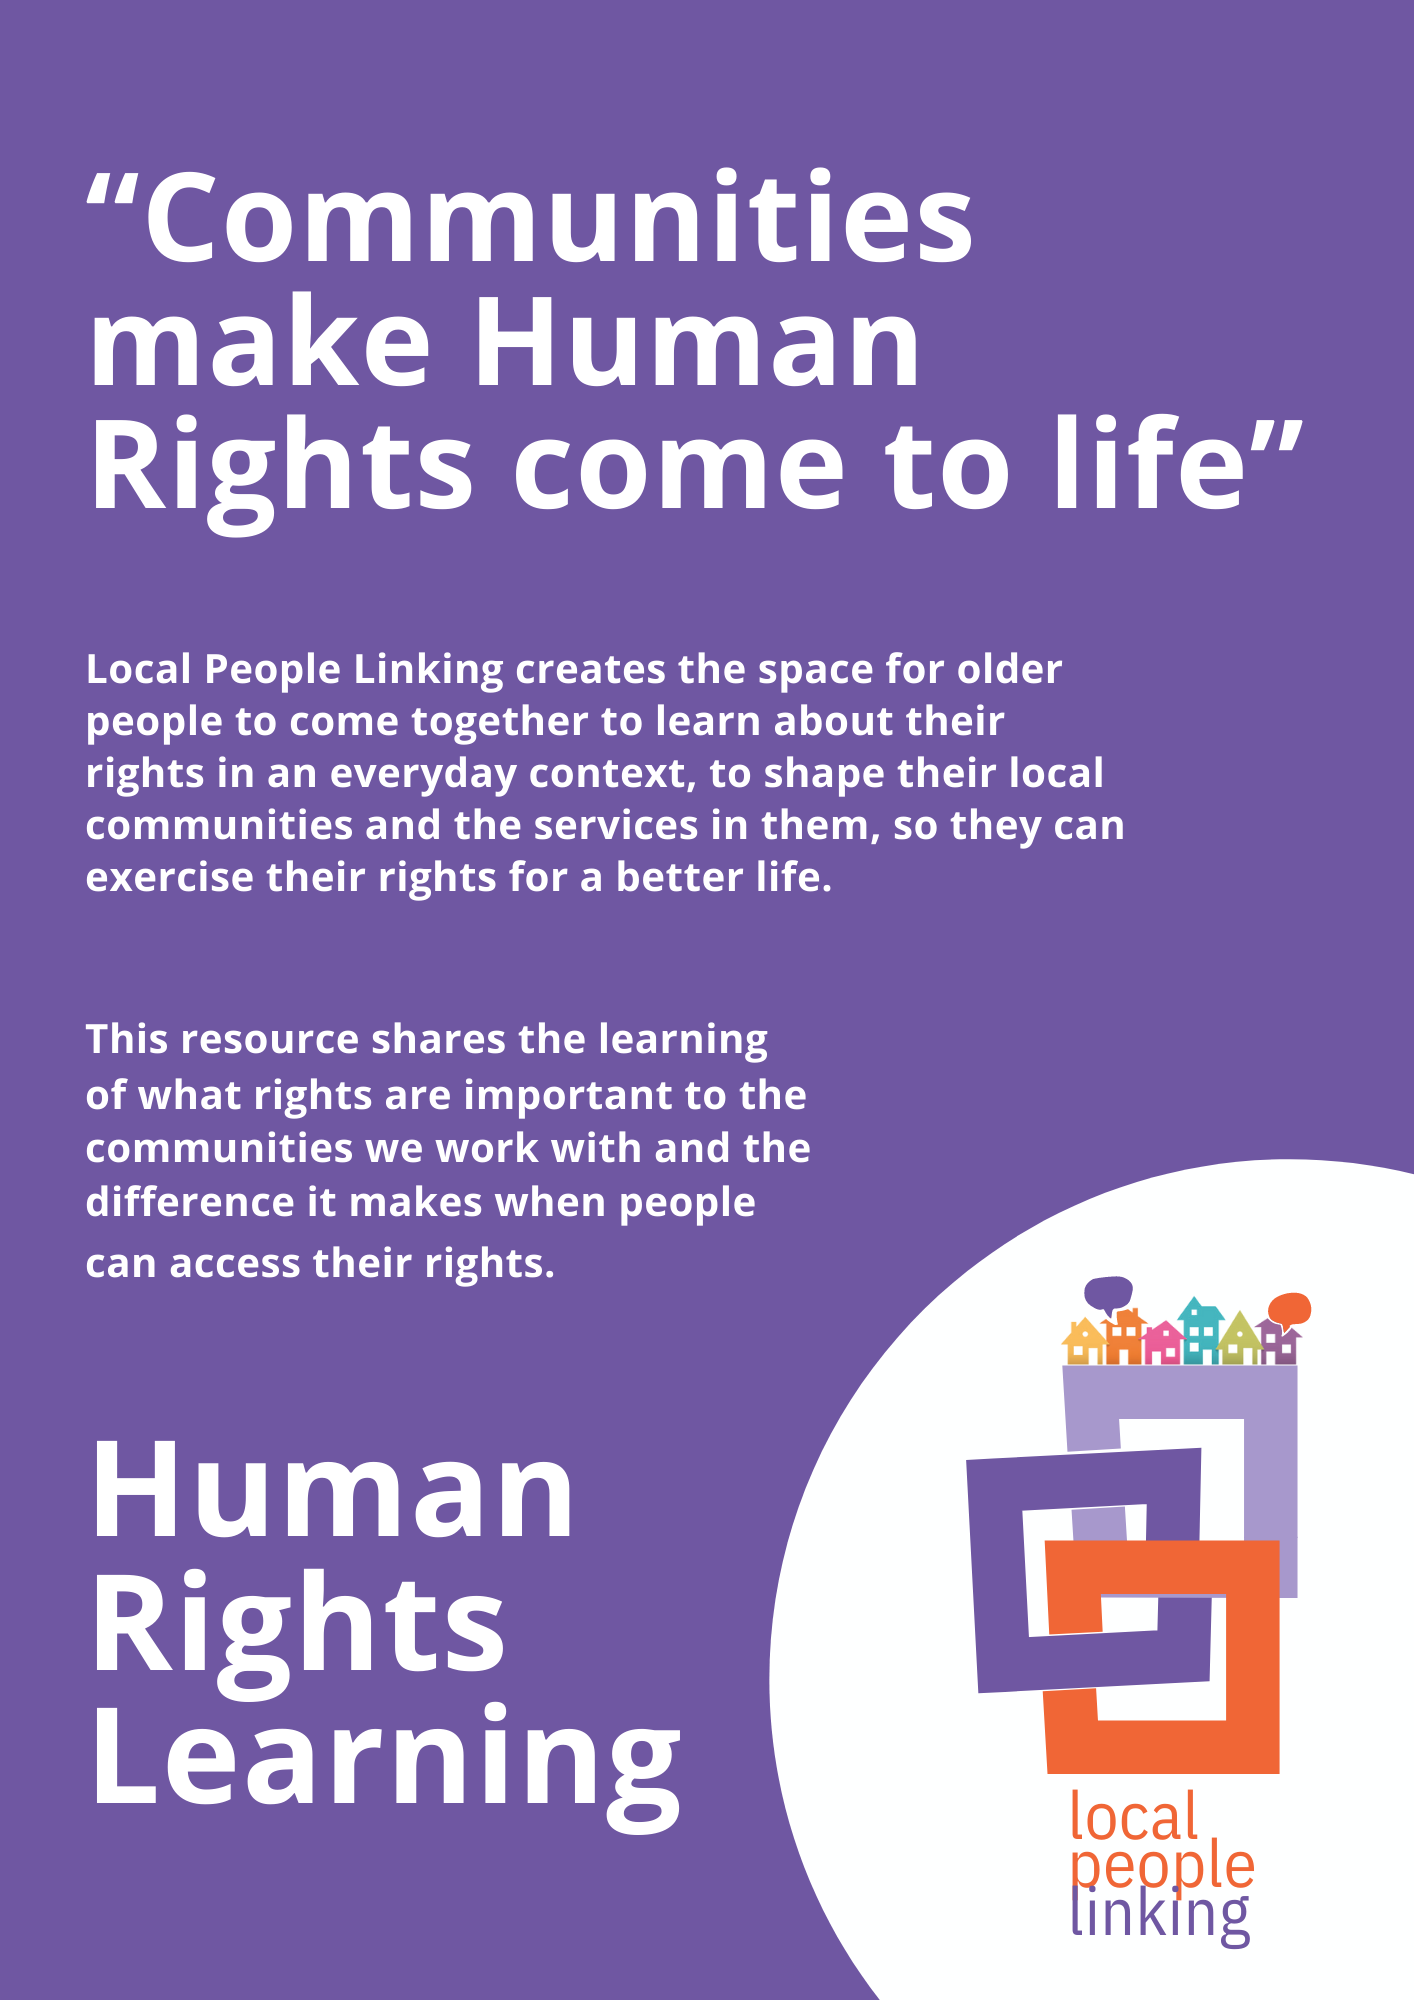 Human Rights Learning cover image with Local People Linking's logo. Large text reads "Communities make human rights come to life". The first 2 paragraphs of the resource are included in unreadably small text.